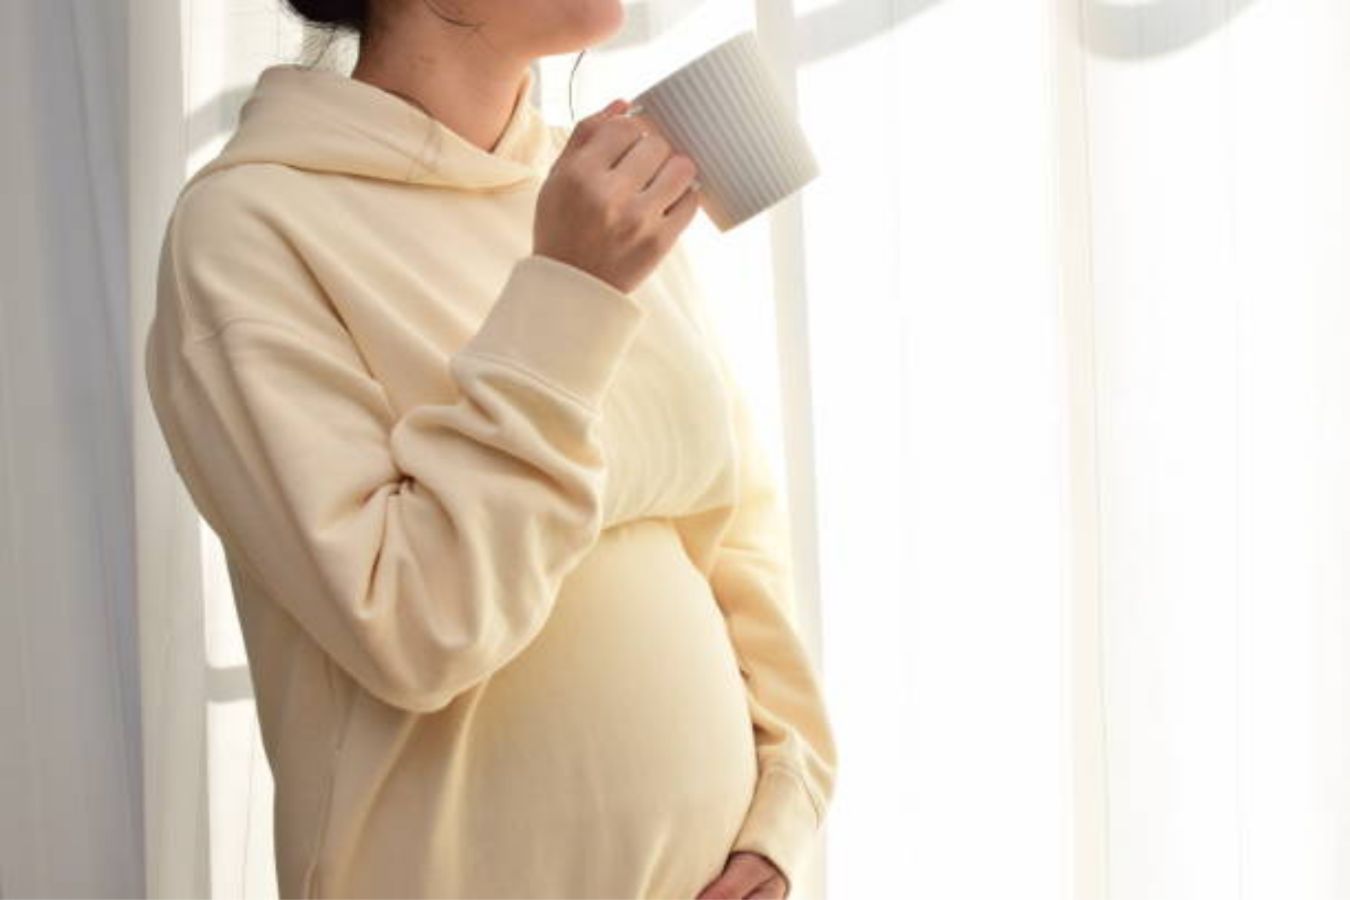 Can Pregnant Women Drink Coffee?